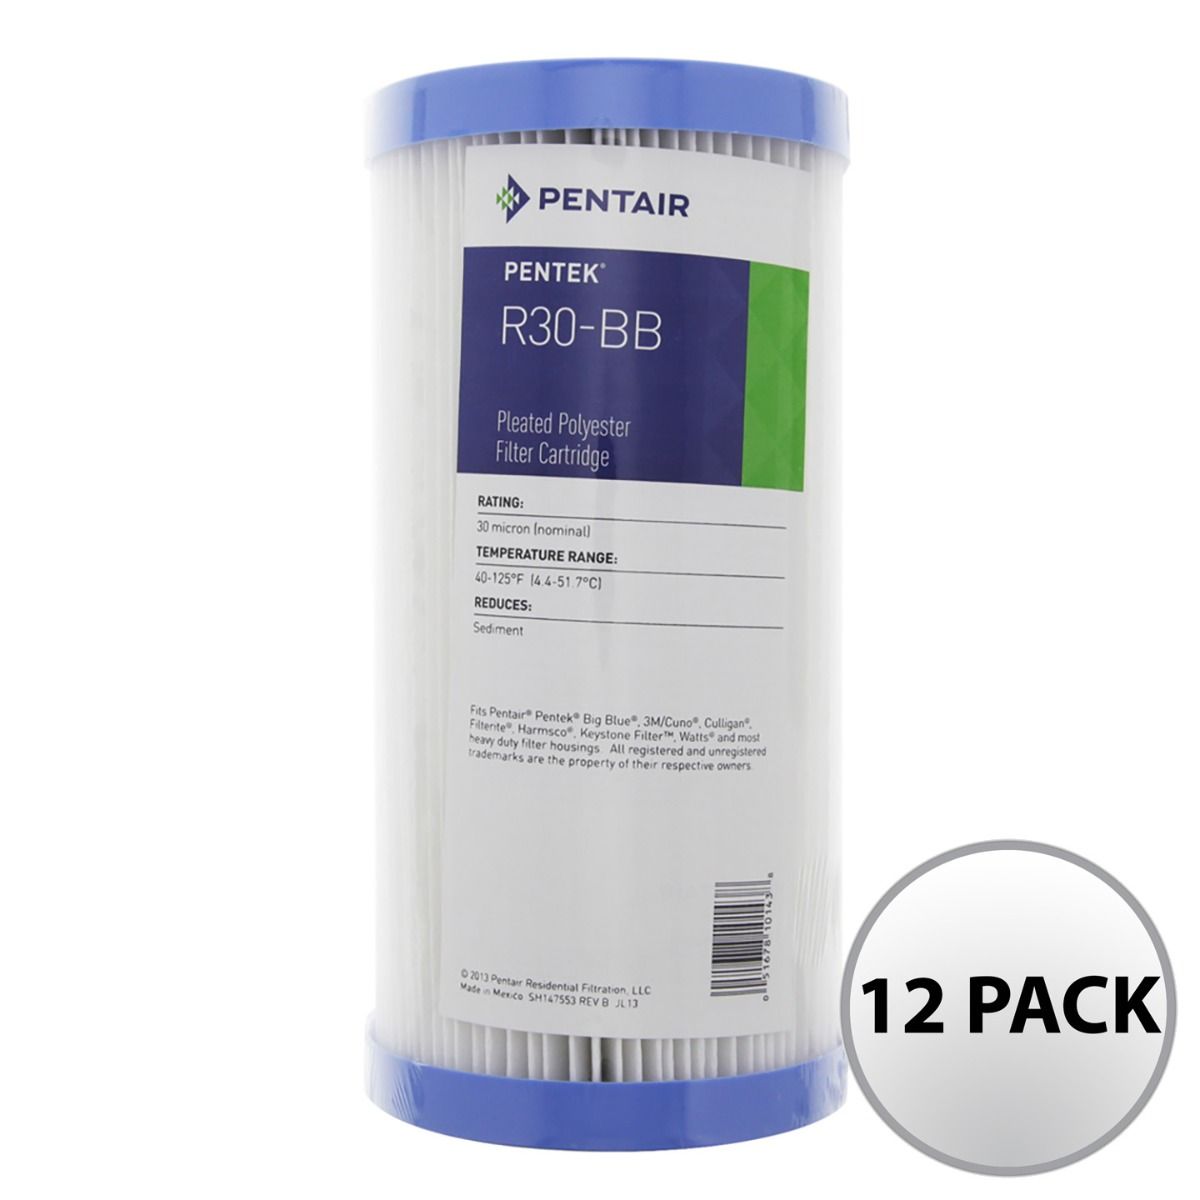 Pentek R30-BB Pleated Polyester Water Filter (9-3/4-inch x 4-1/2-inch)